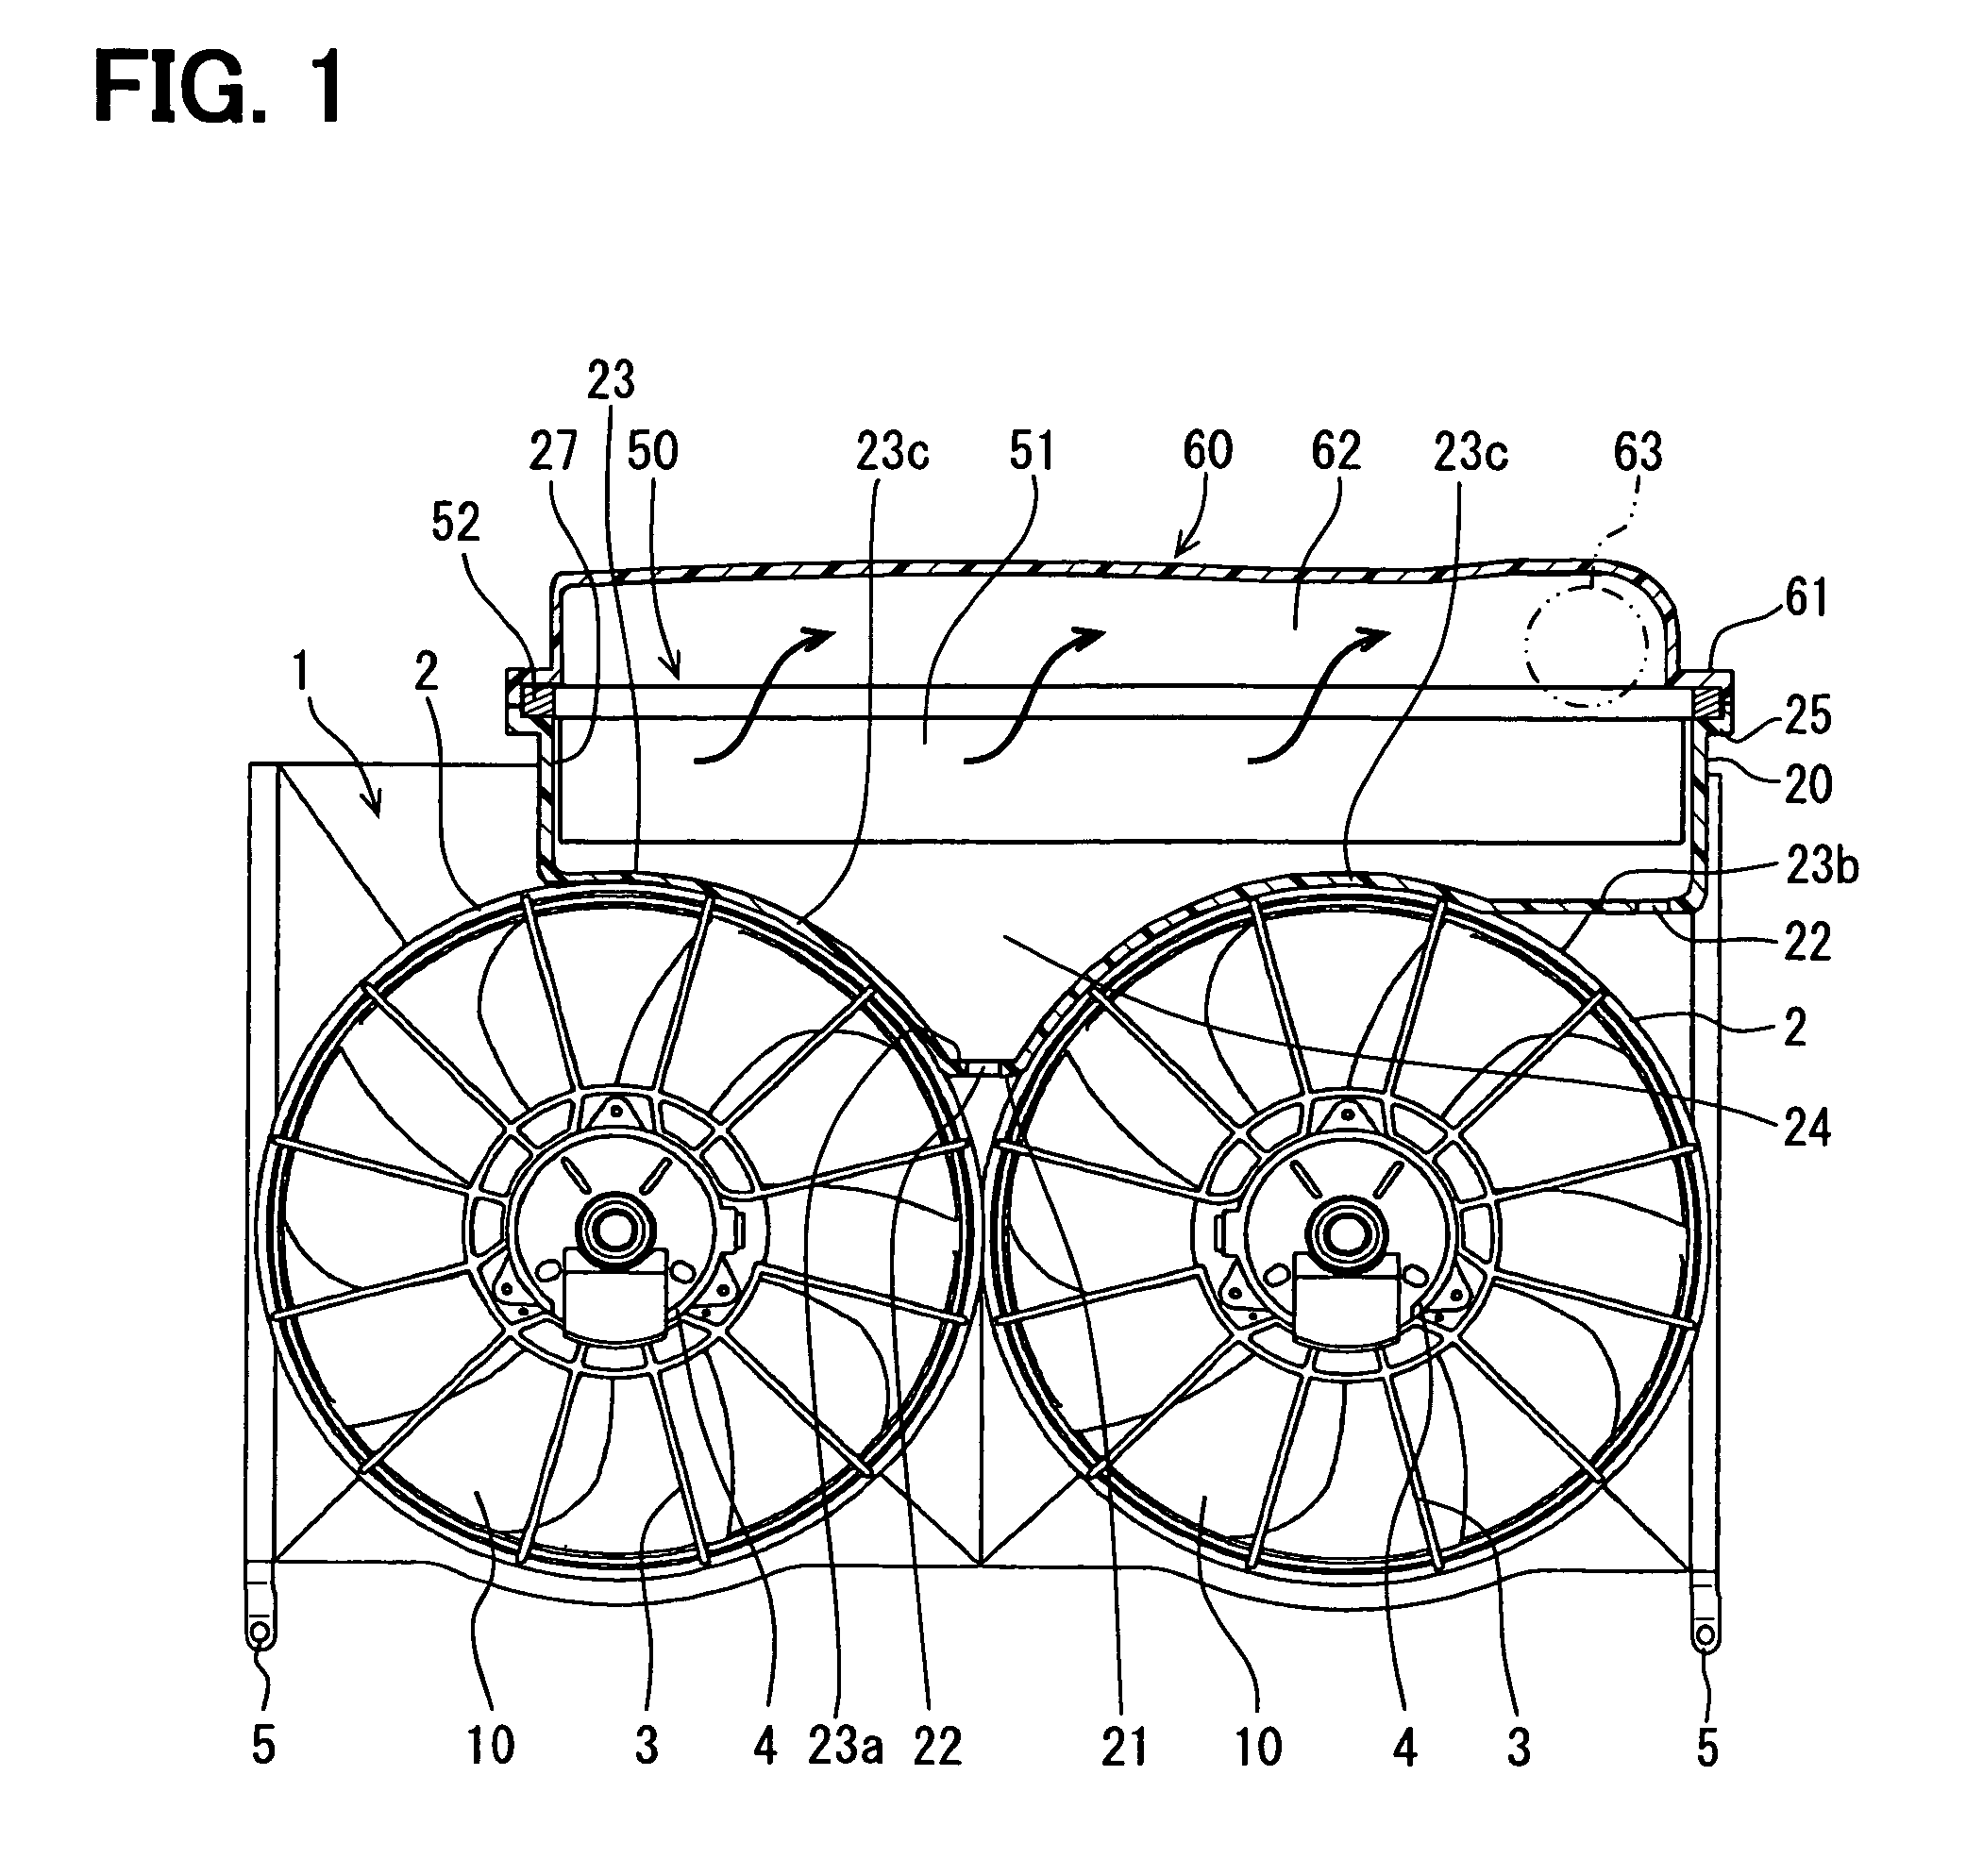 Air cleaner unit for vehicle and fan shroud having the same